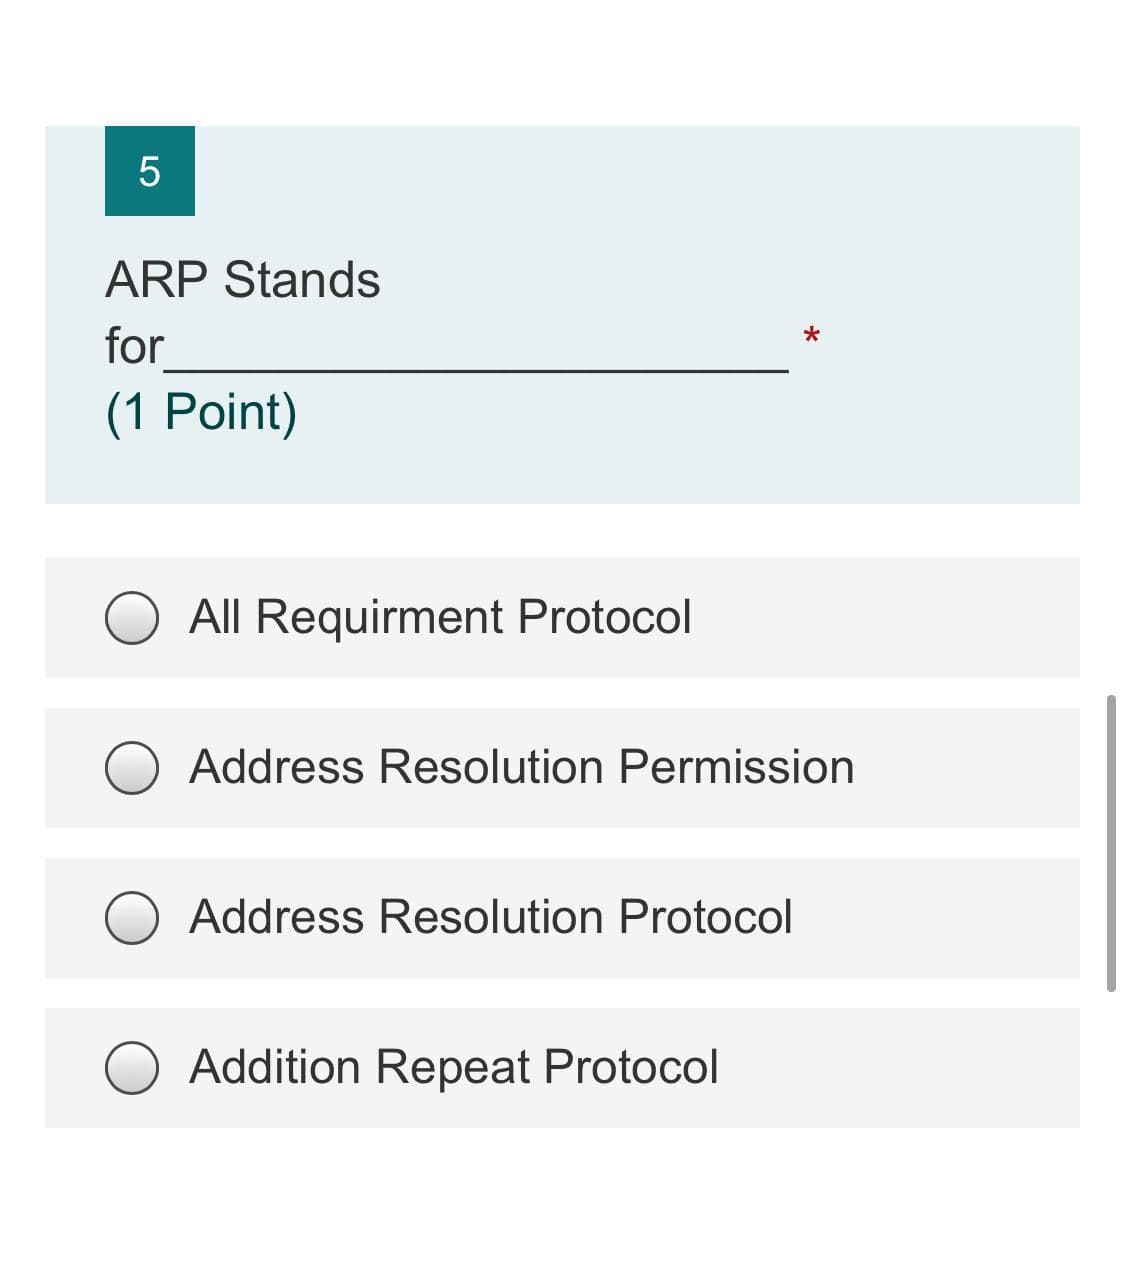 5
ARP Stands
for
(1 Point)
All Requirment Protocol
Address Resolution Permission
Address Resolution Protocol
Addition Repeat Protocol
